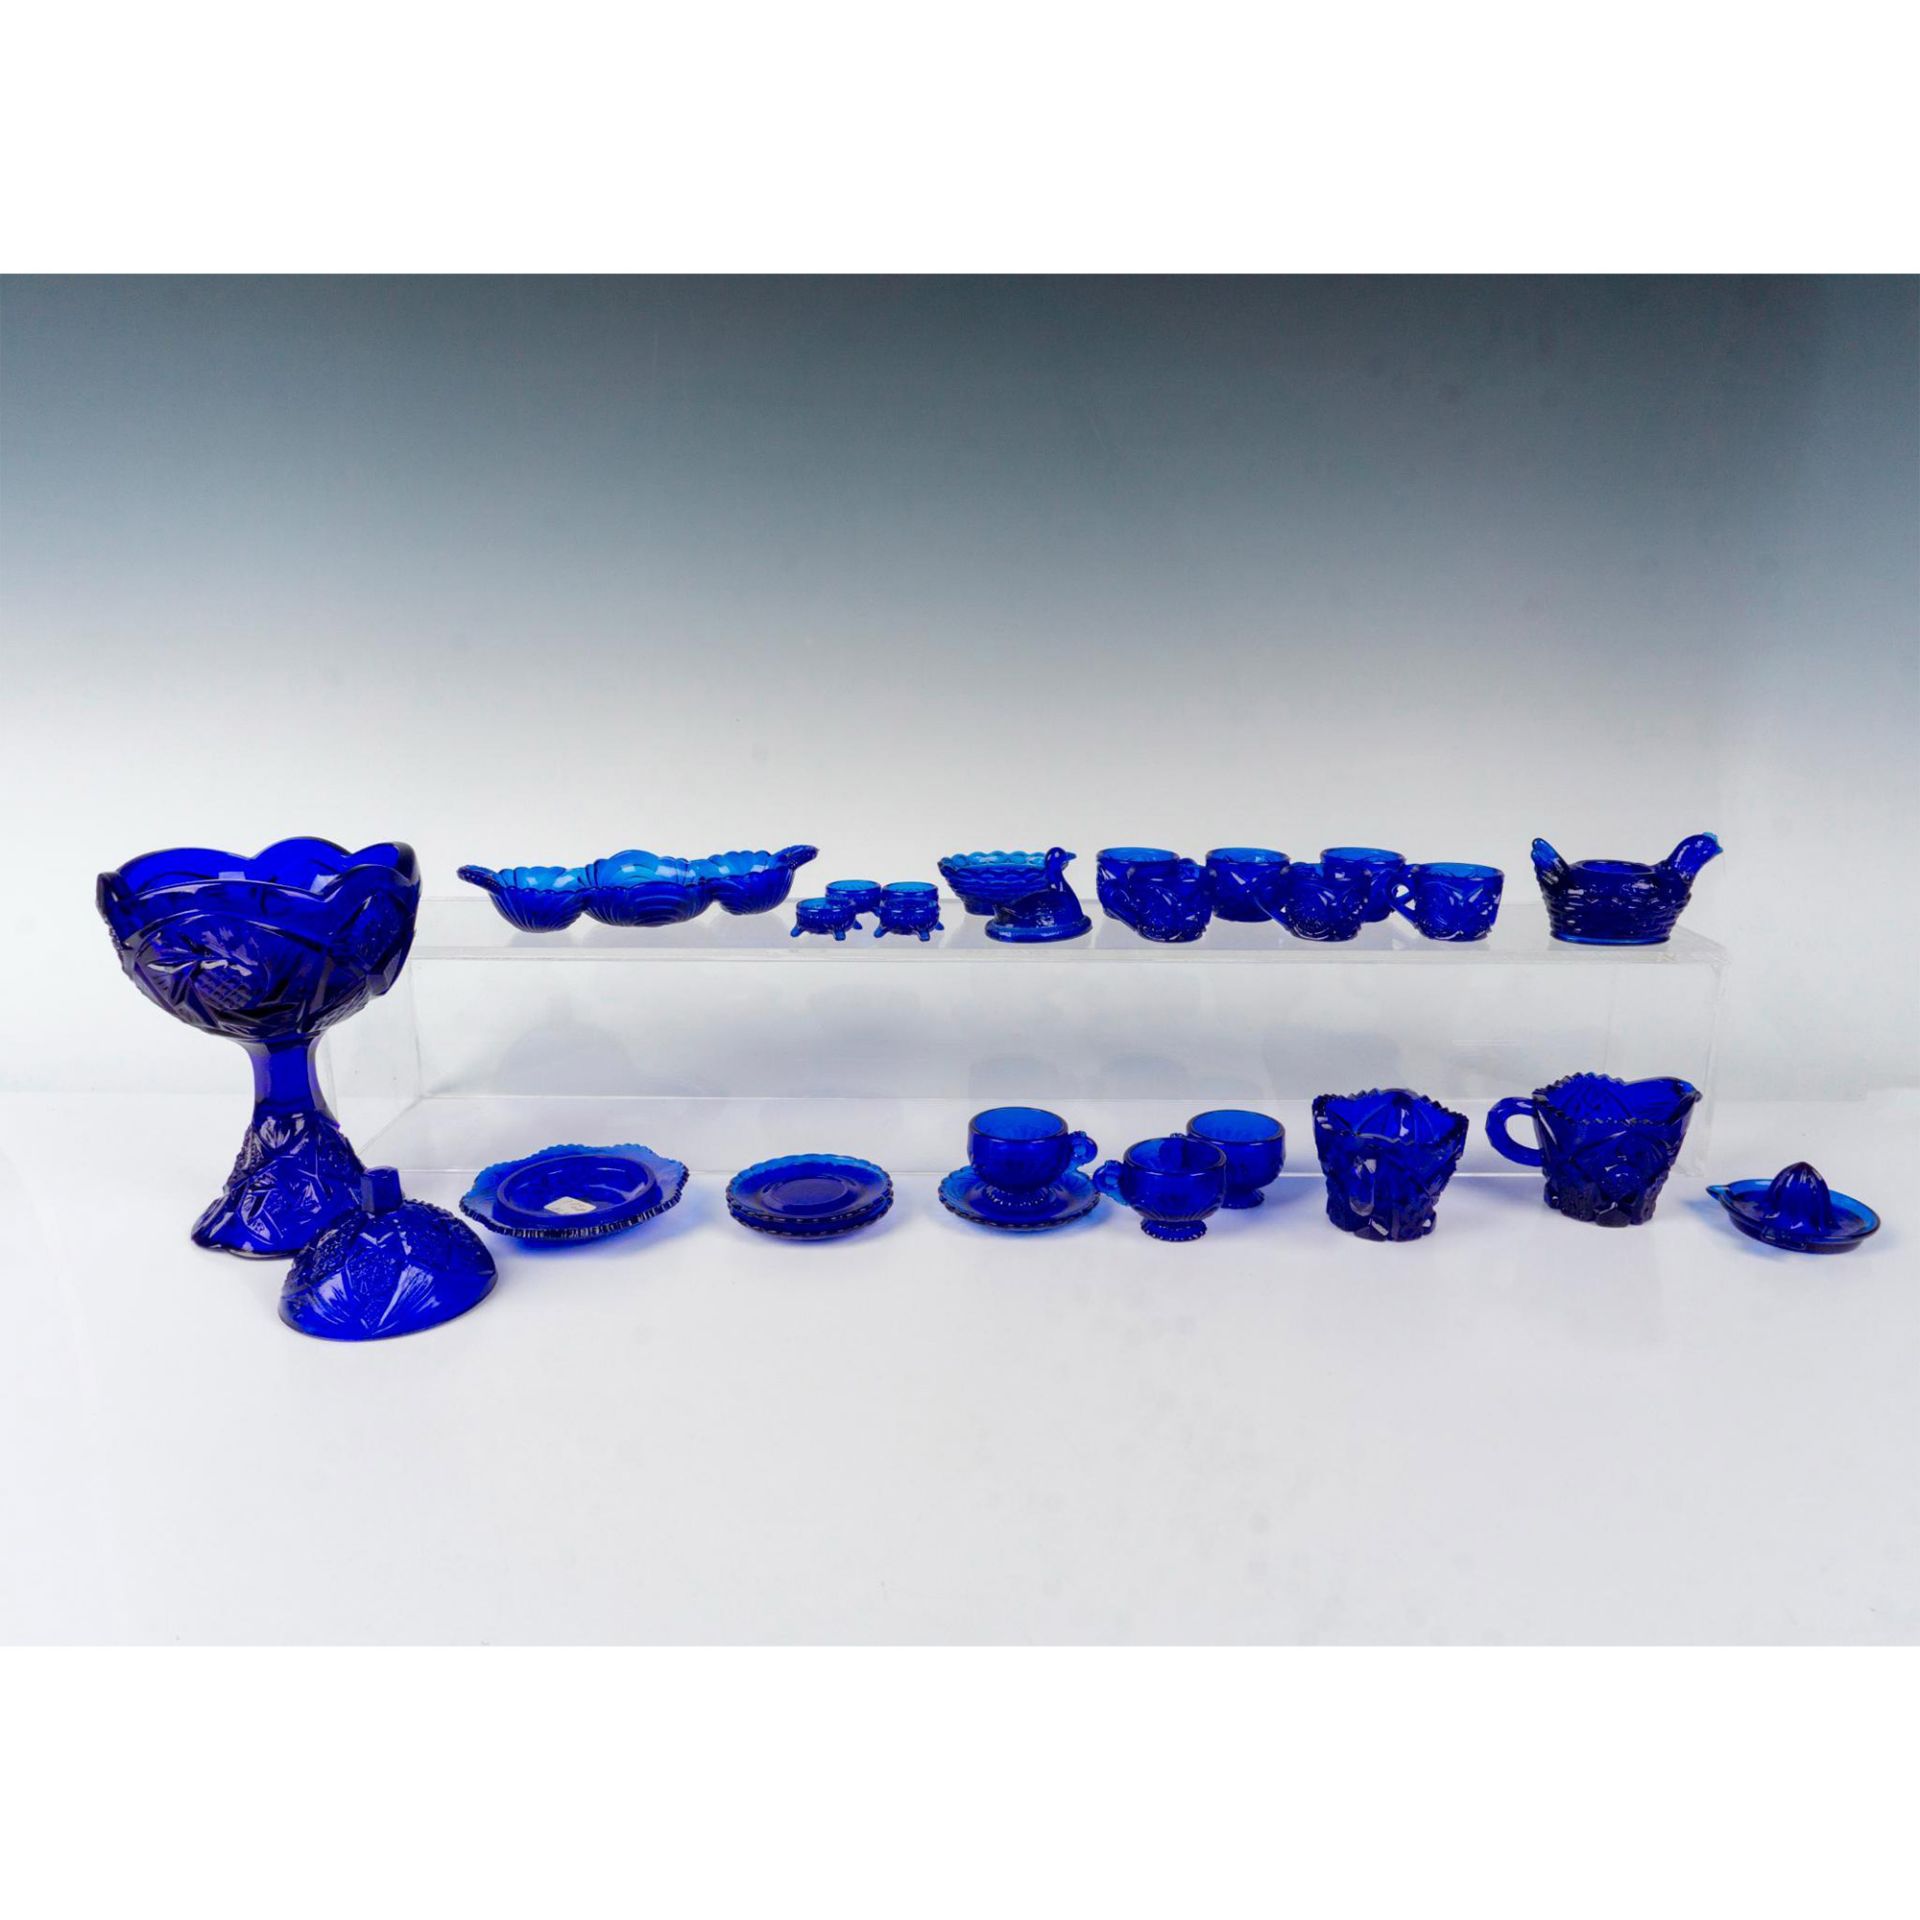 24pc Cobalt Blue Child's Glassware Grouping - Image 2 of 3